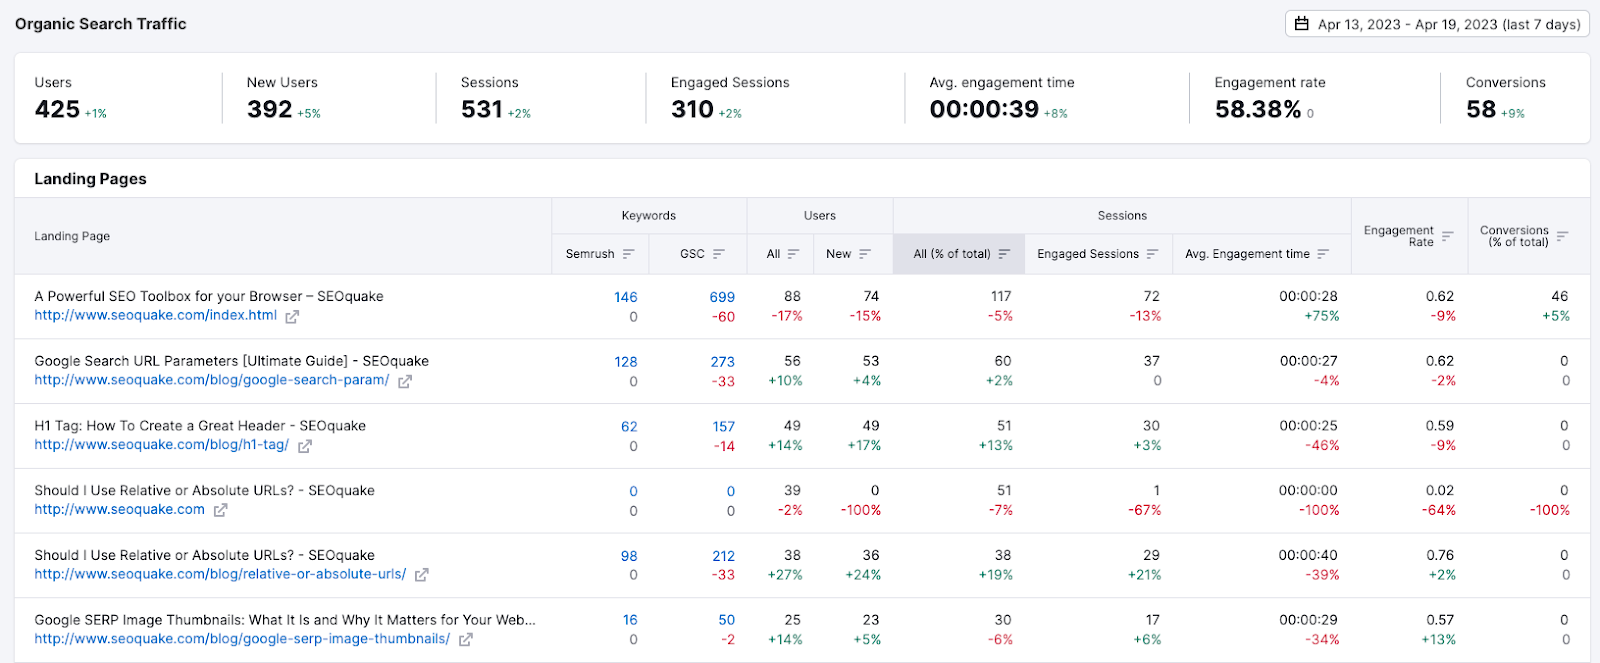 A screenshot from the Organic Traffic Insights showing the main metrics, landing pages, keywords, and their metrics.